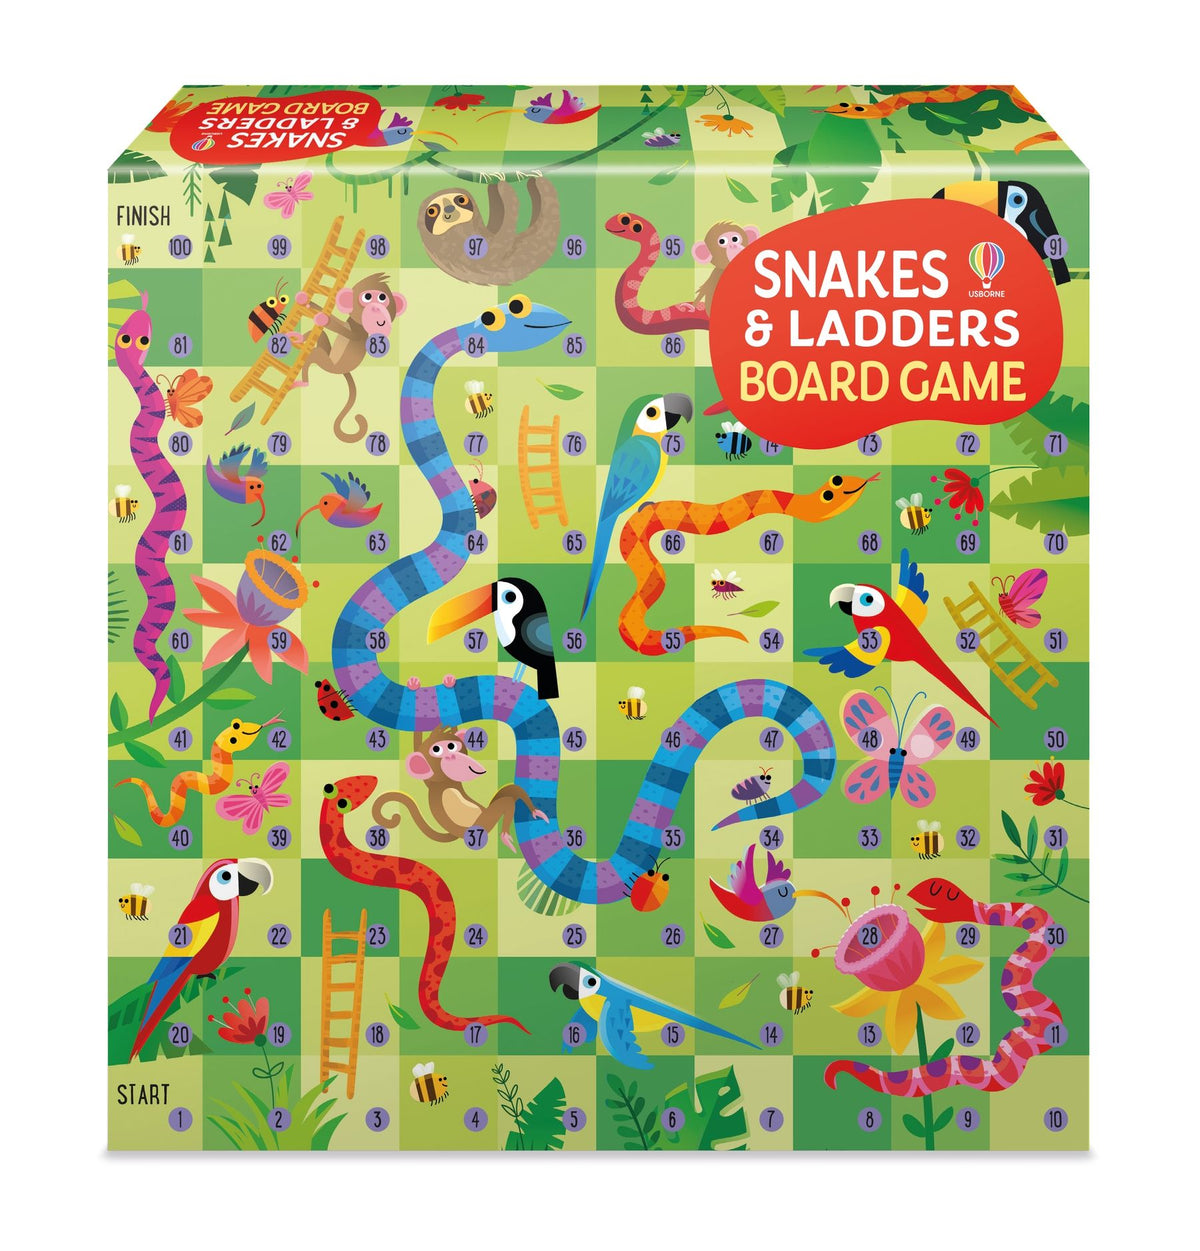 The Timelessness of Snakes and Ladders | by Doug Bierend | re:form | Medium